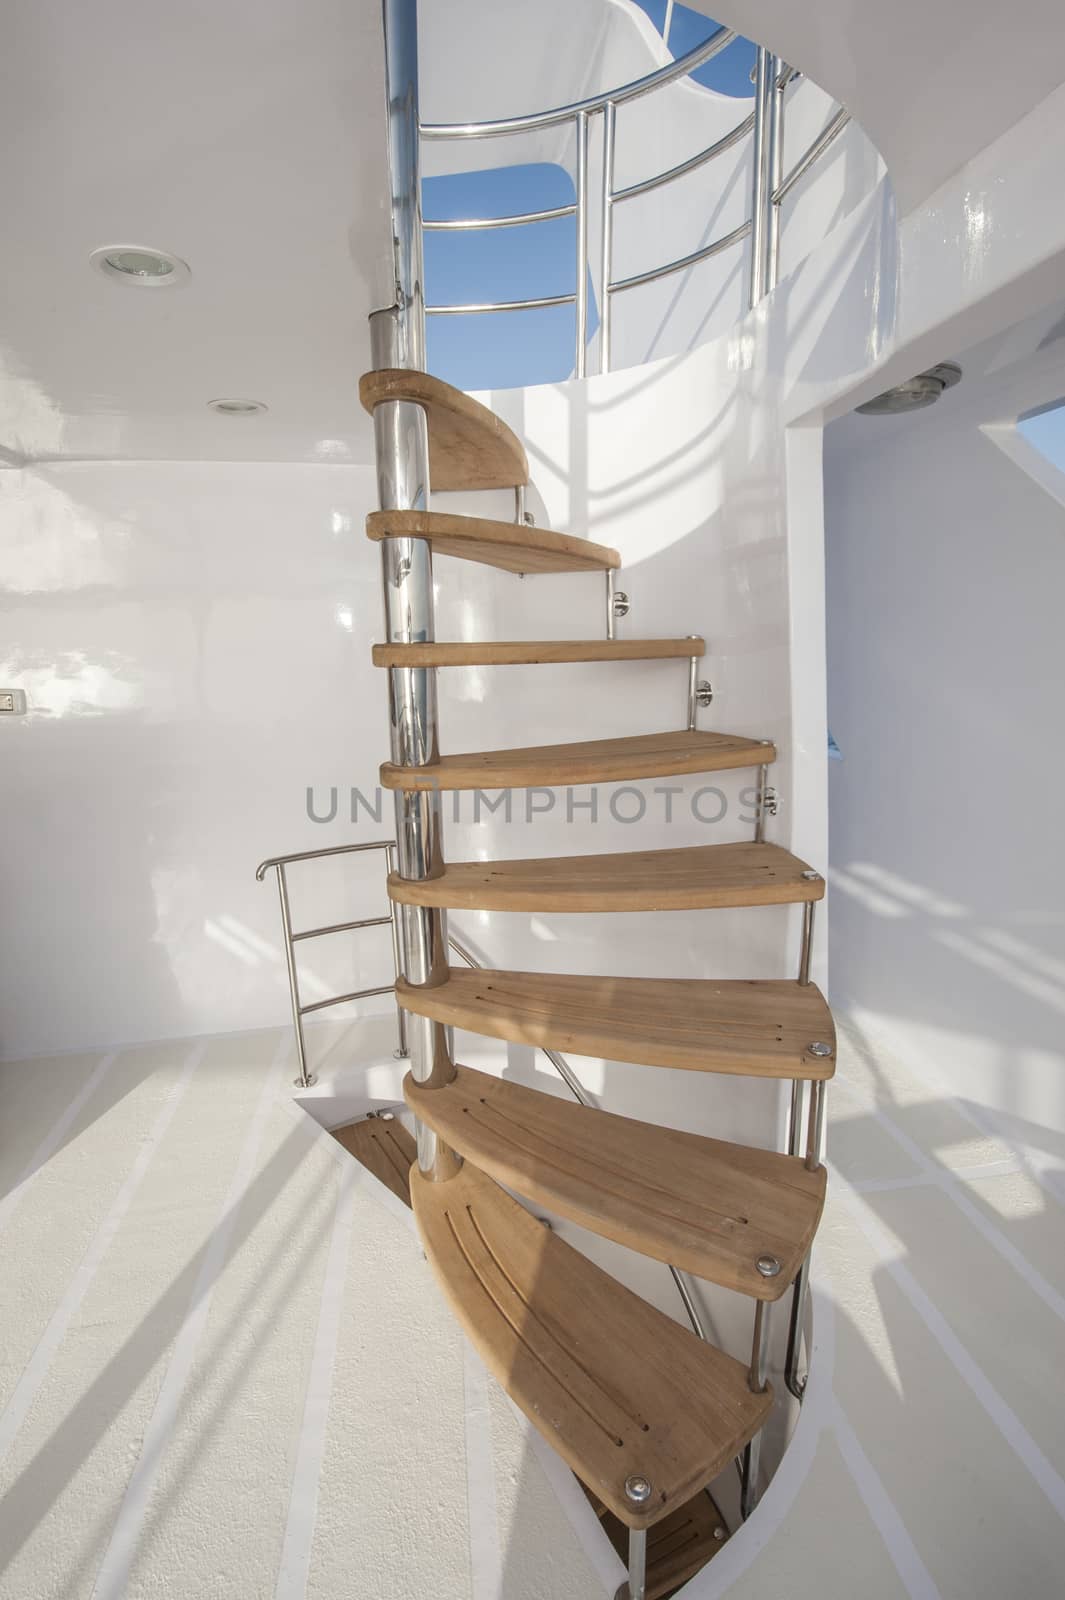 Wooden staircase on sundeck of luxury yacht by paulvinten